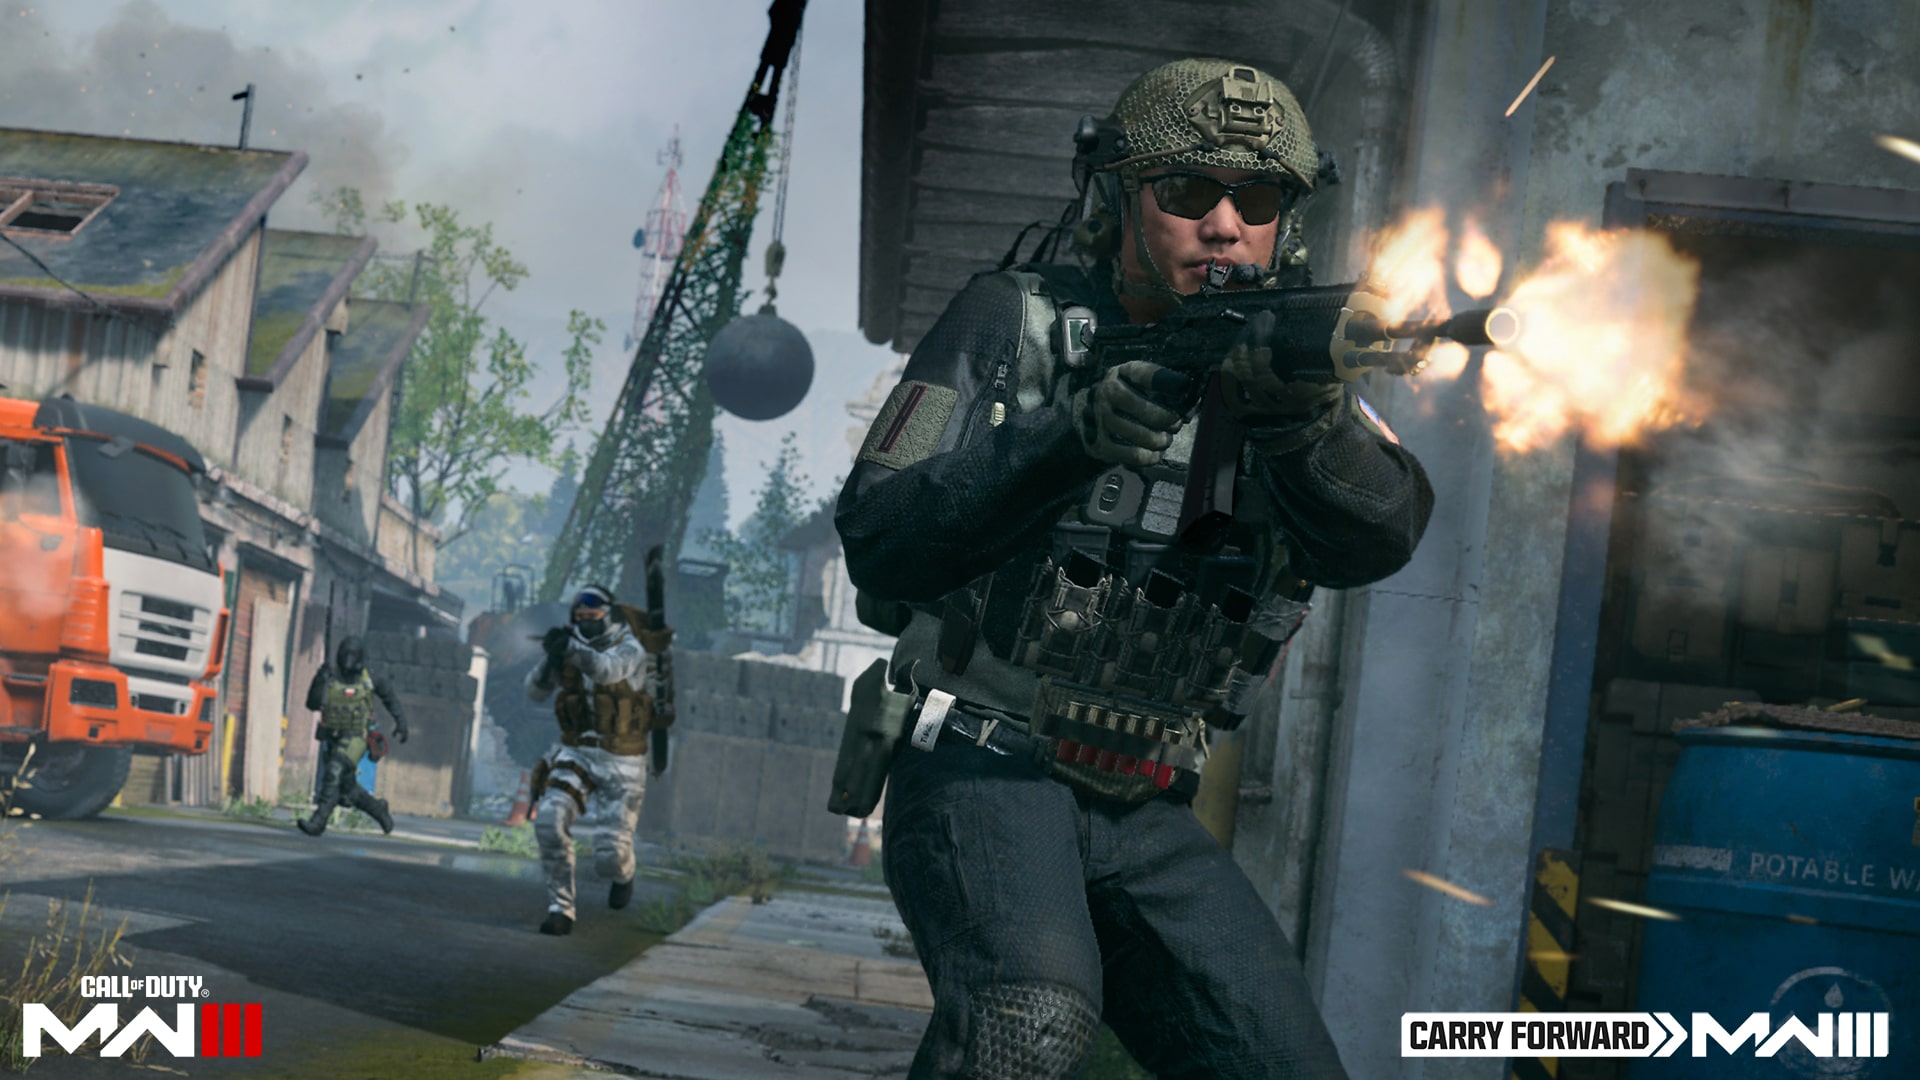 Call Of Duty Modern Warfare 2 PC Requirements REVEALED - Full MW2